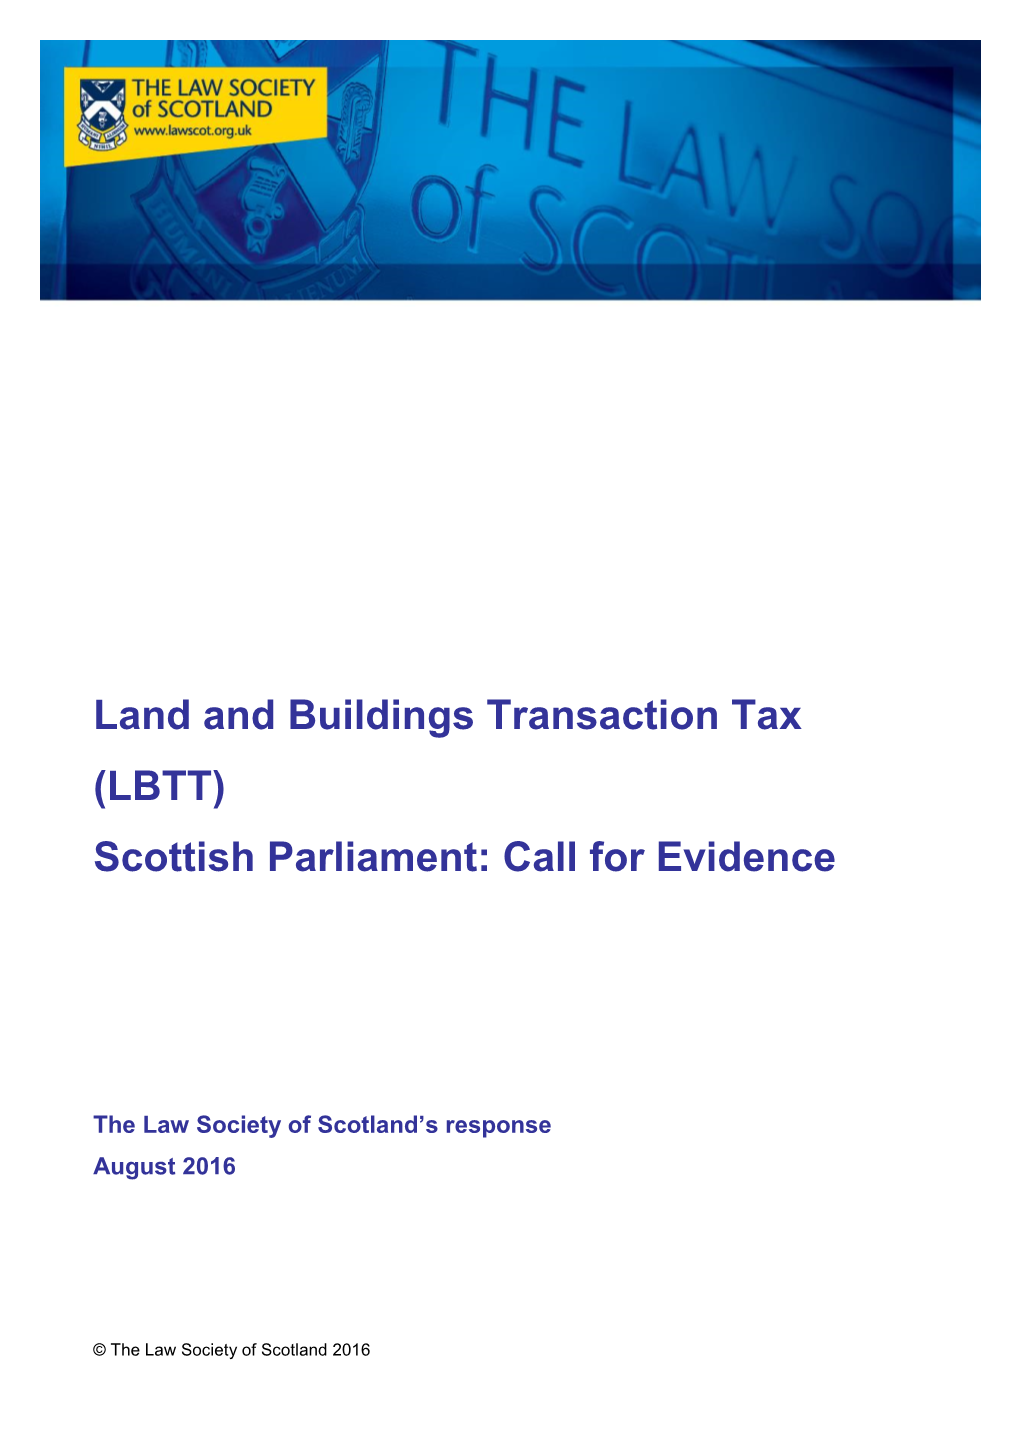 Land and Buildings Transaction Tax (LBTT) Scottish Parliament: Call for Evidence